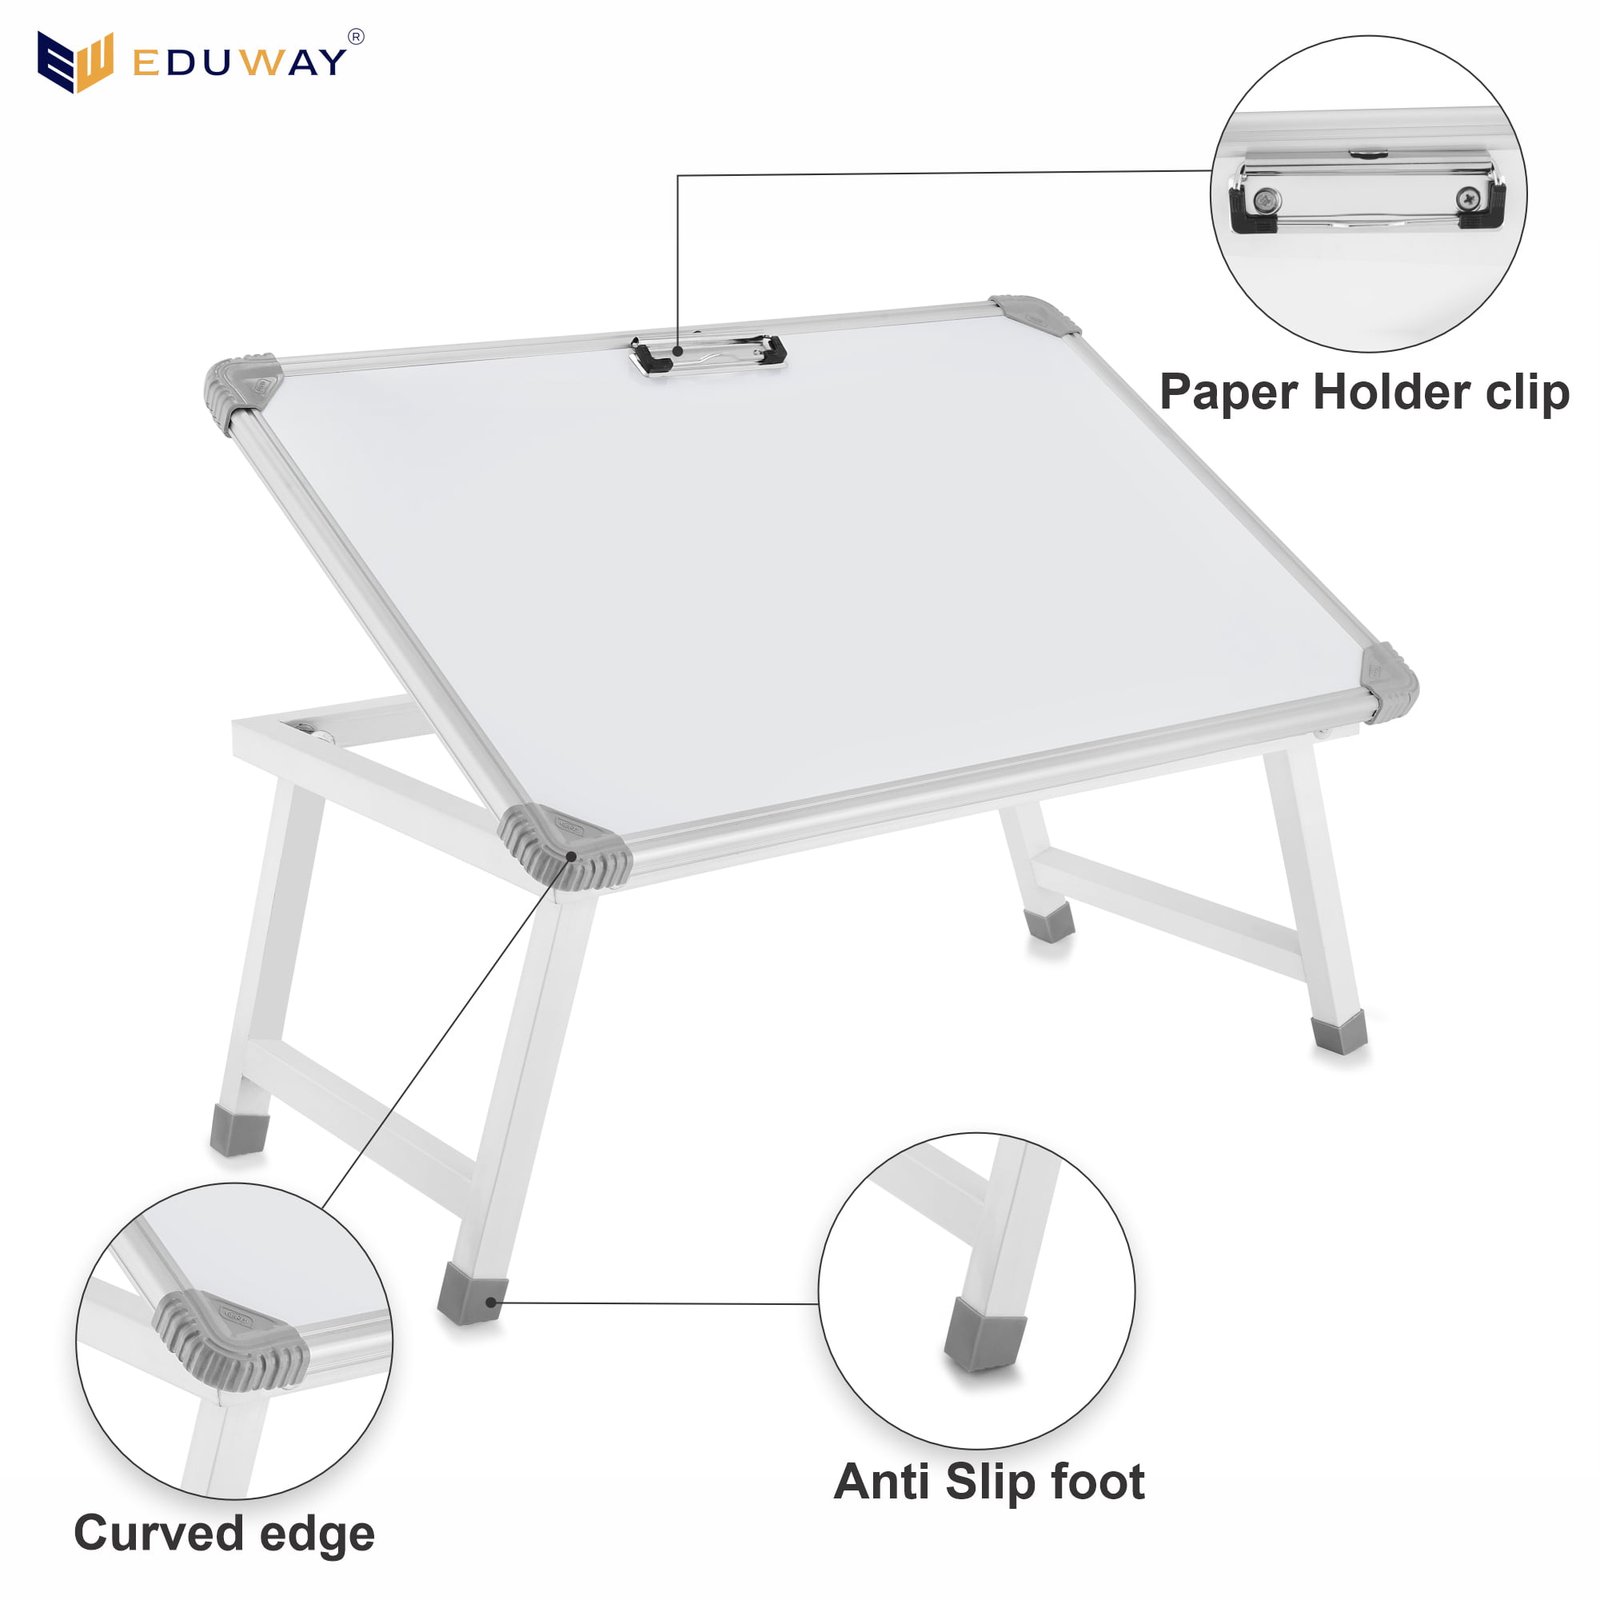 Whiteboard table features